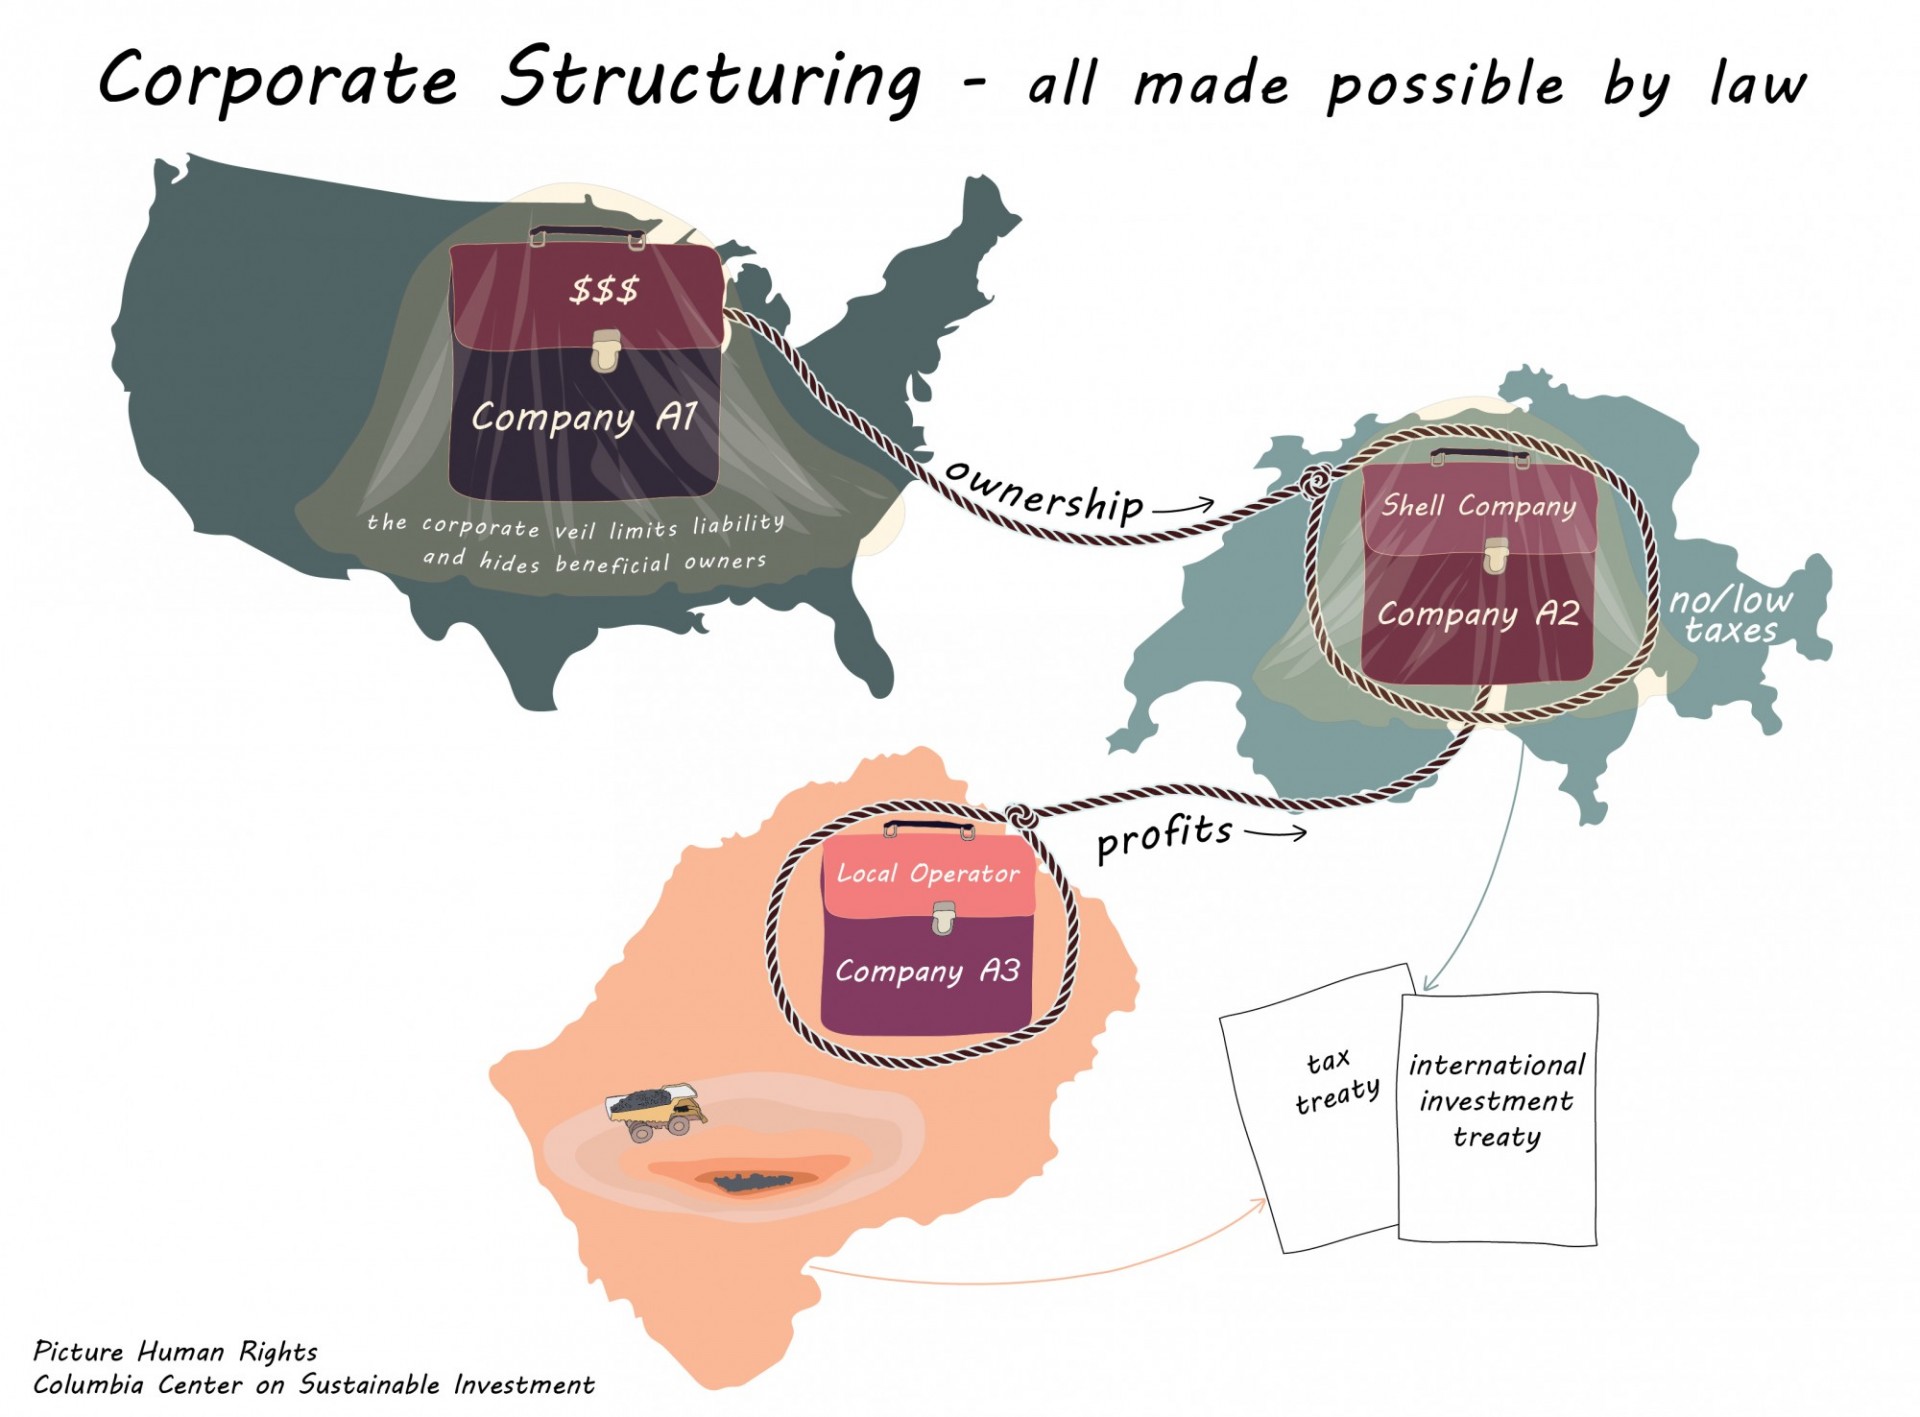 Graphic titled "Corporate Structuring - all made possible by law". Depicts three countries labeled "$$$: Company A1," "Shell Company: Company A2," and "Local Operator: Company A3." Arrows indicate that Company A3's profits go to Company A2, Company A1's ownership goes to Company A2, and Company A2 and Company A3 exchange a tax and international investment treaty. Text on Company A1 reads "the corporate veil limits liability and hides beneficial owners." Text on Company A2 reads "no or low taxes." 